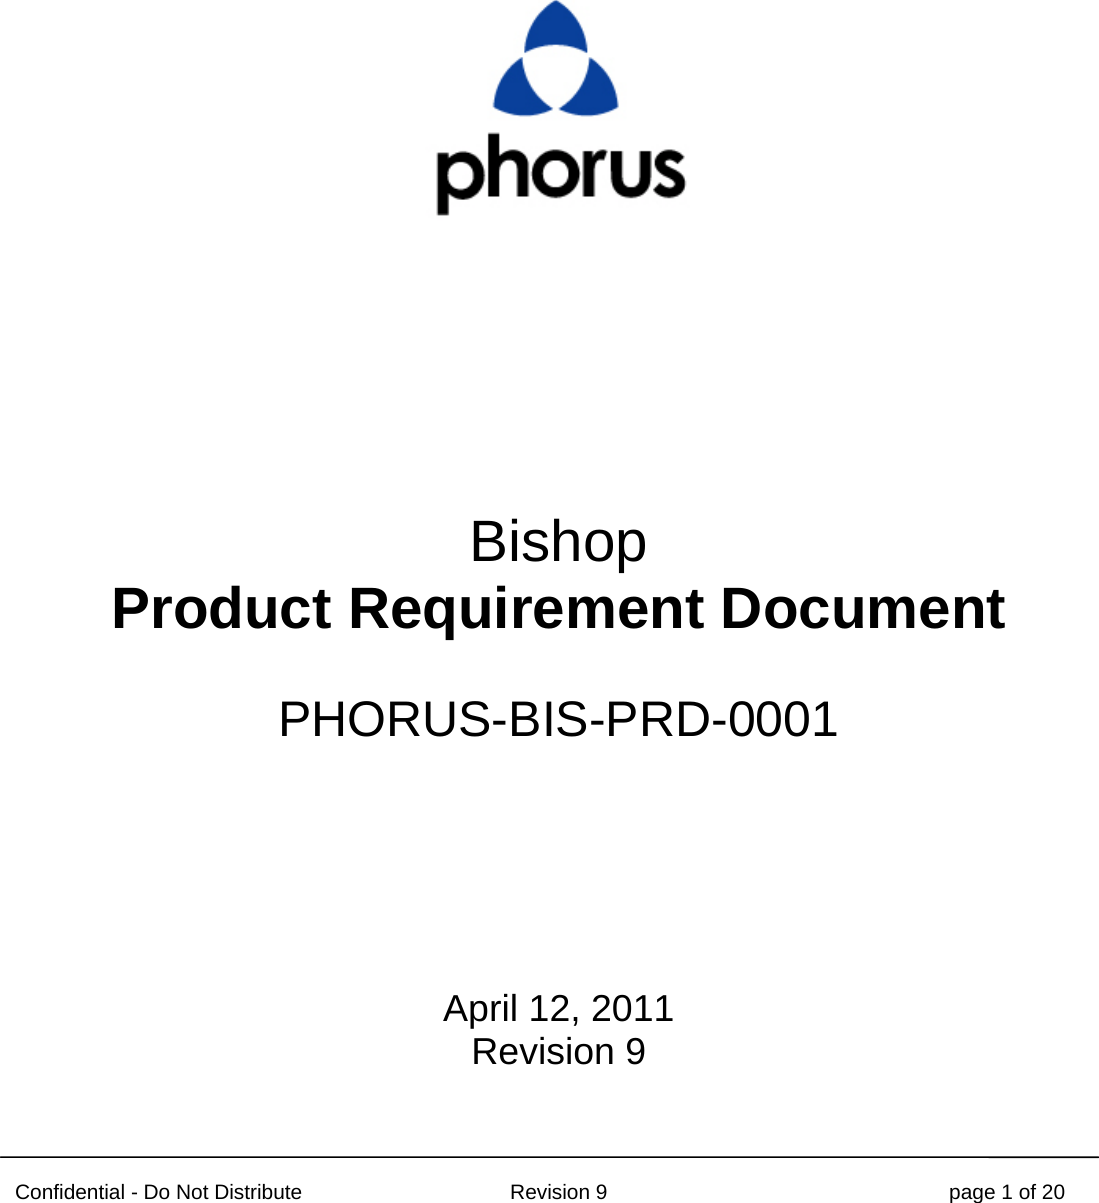 Confidential - Do Not Distribute Revision 9 page 1 of 20          Bishop Product Requirement Document  PHORUS-BIS-PRD-0001      April 12, 2011 Revision 9  